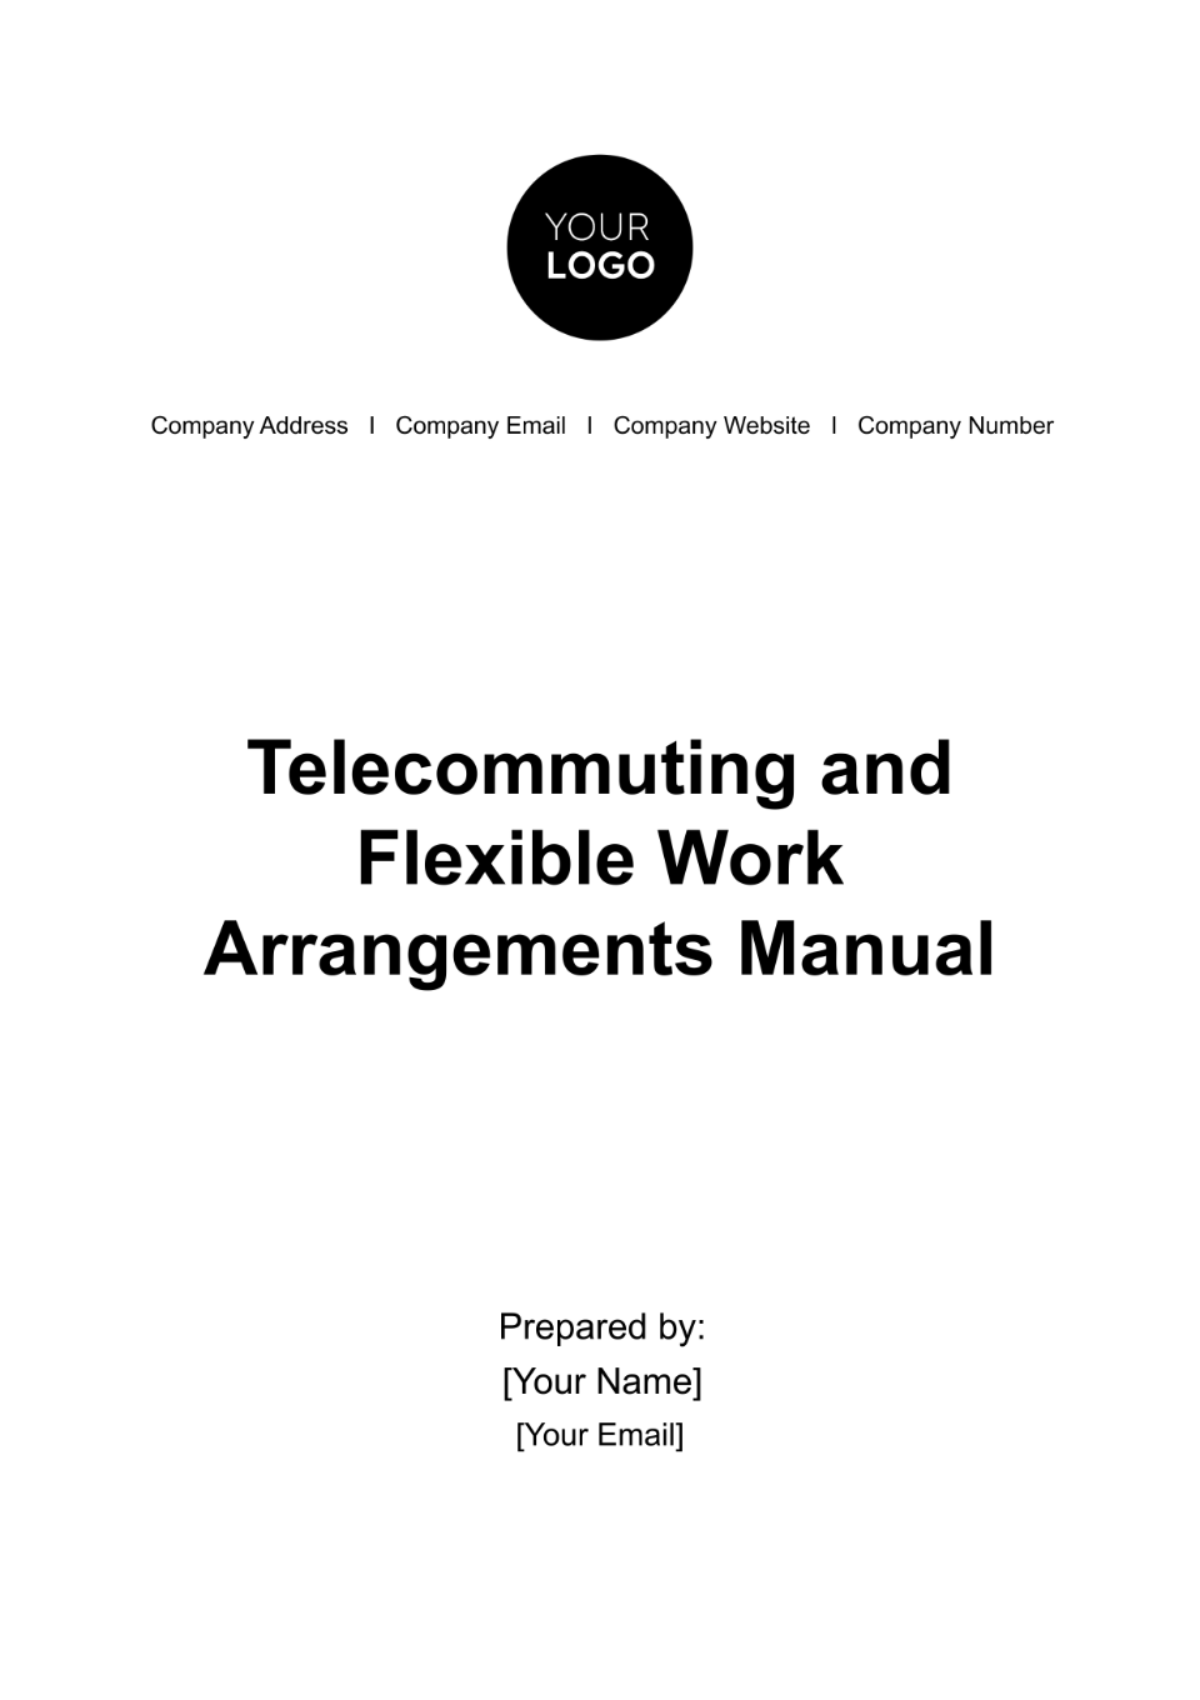 Free Telecommuting and Flexible Work Arrangements Manual HR Template